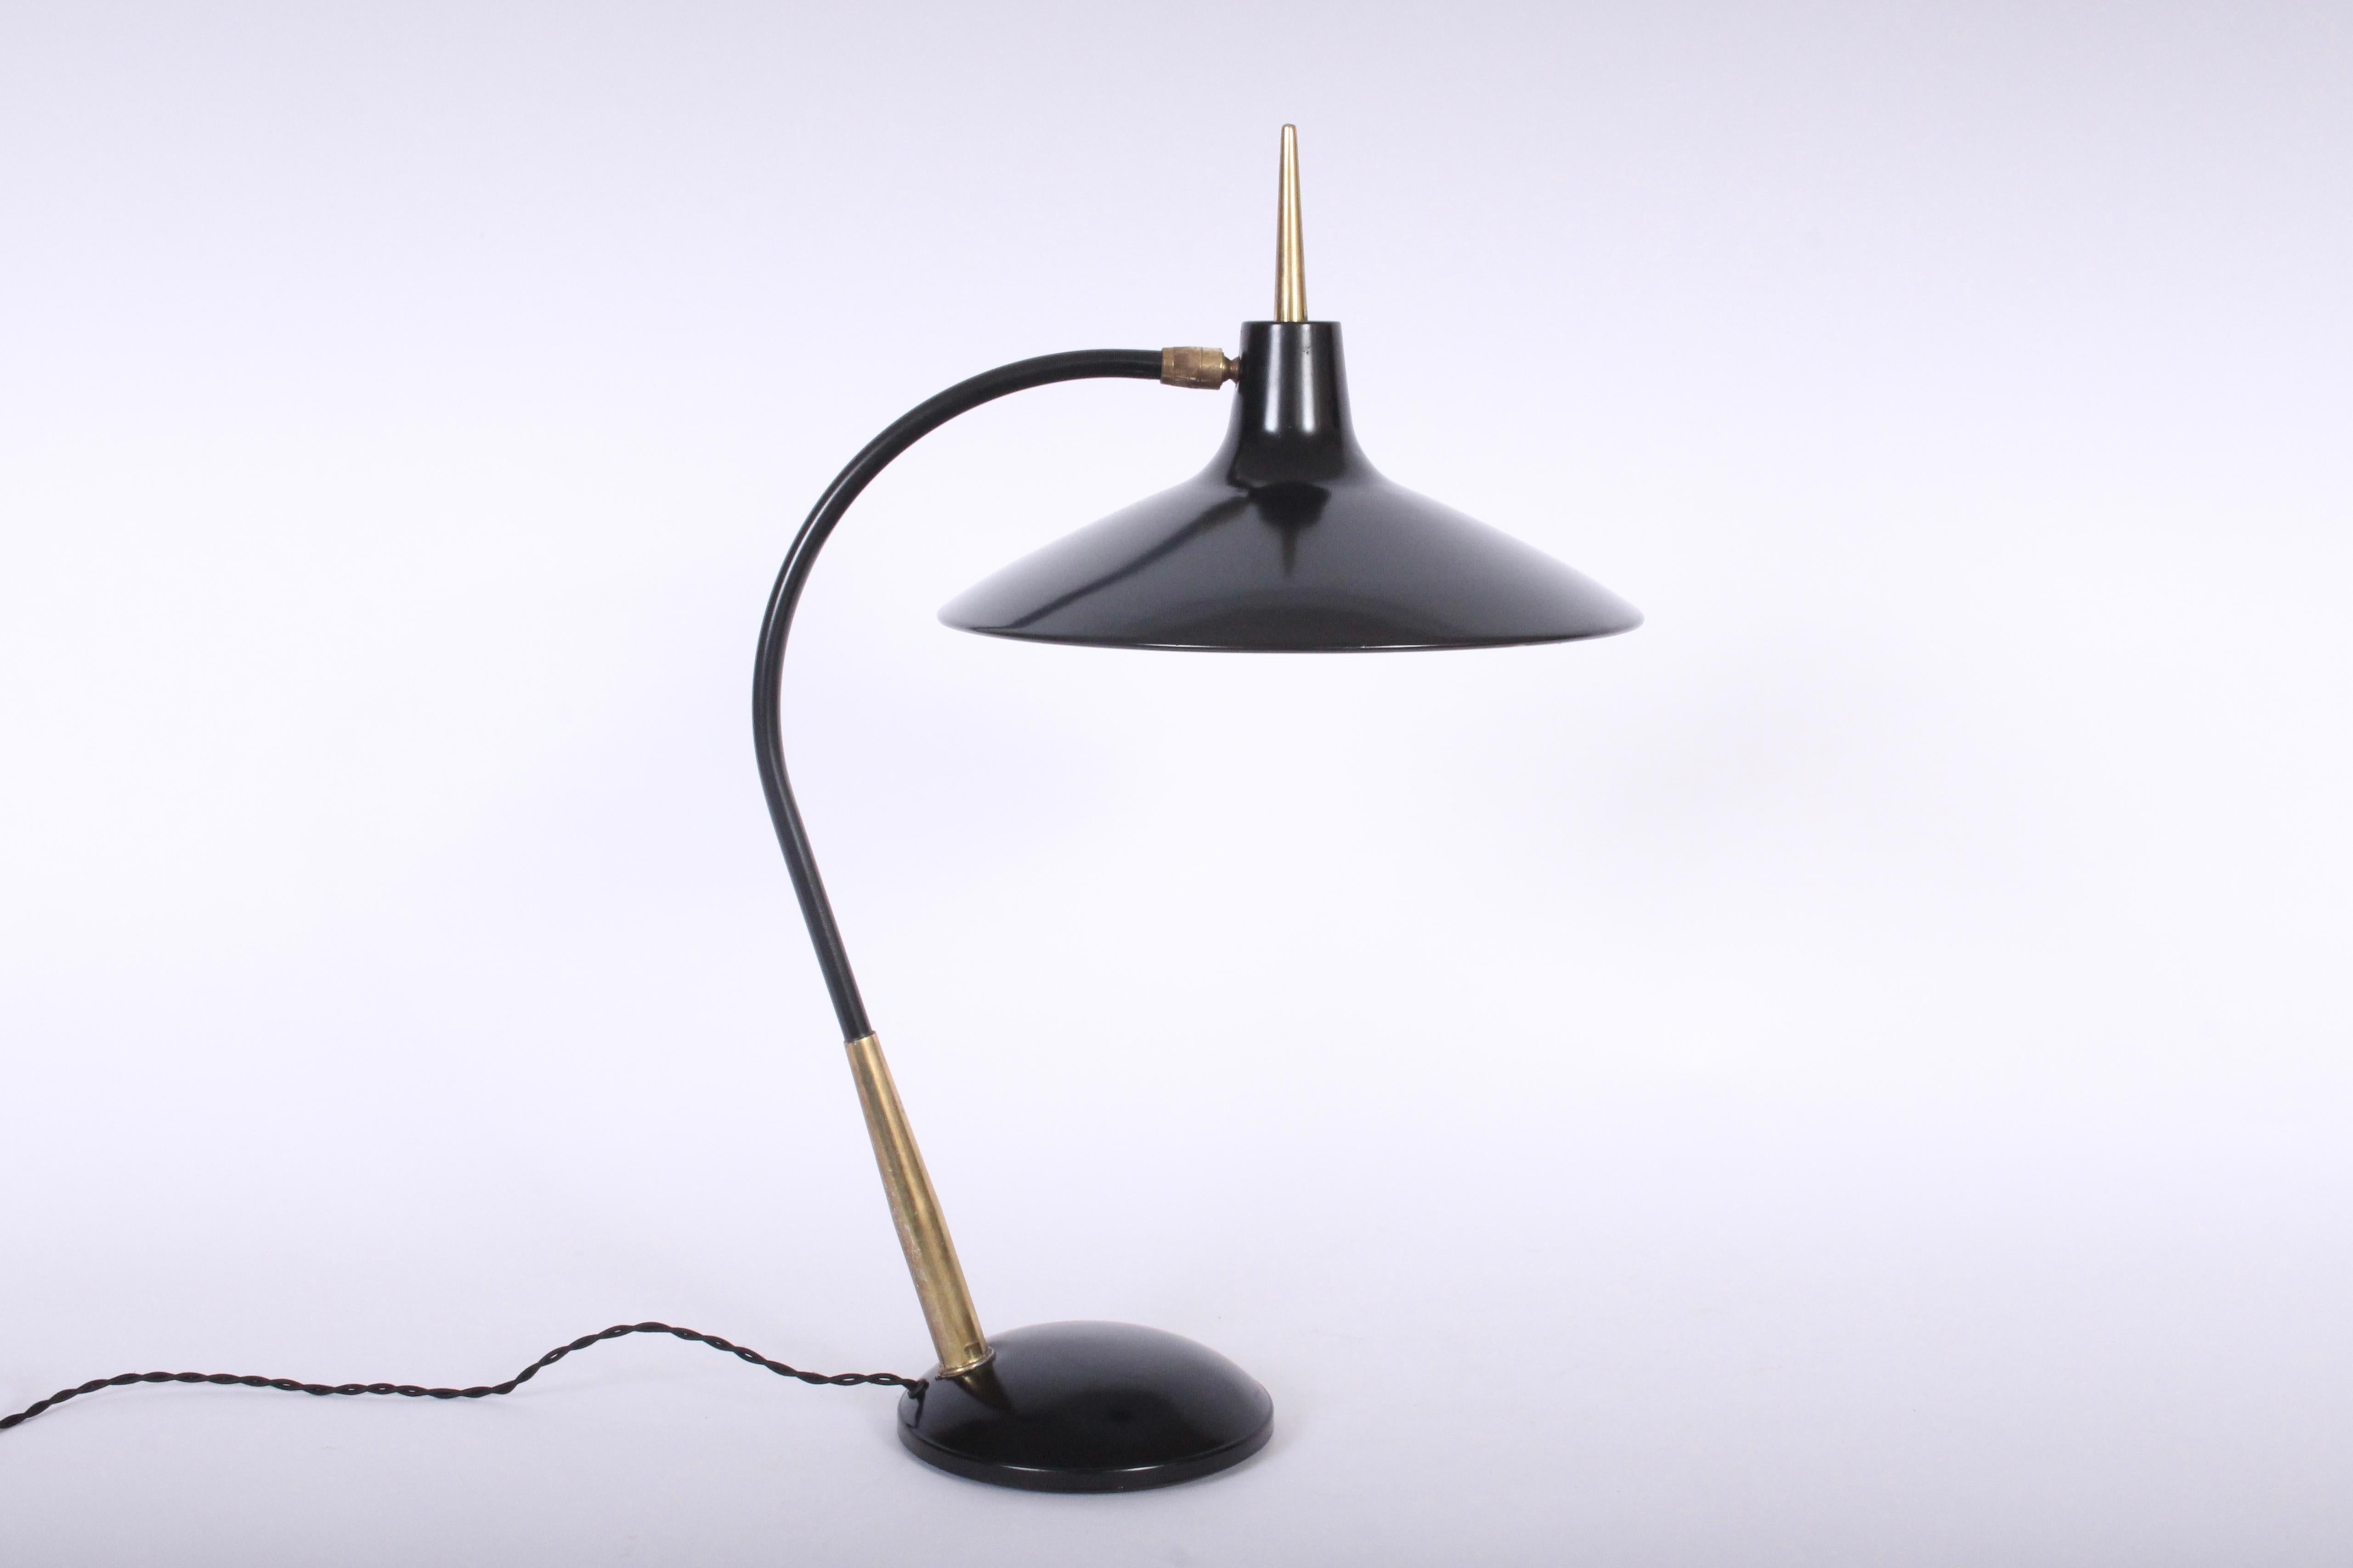 American Mid-Century Modern adjustable black enameled Laurel reading lamp in the style of Gerald Thurston. Featuring a black enameled shade, stem and base with patinated brass details. Adjustable tilt shade. Shade 15D. Base 6.5D. Without reflector